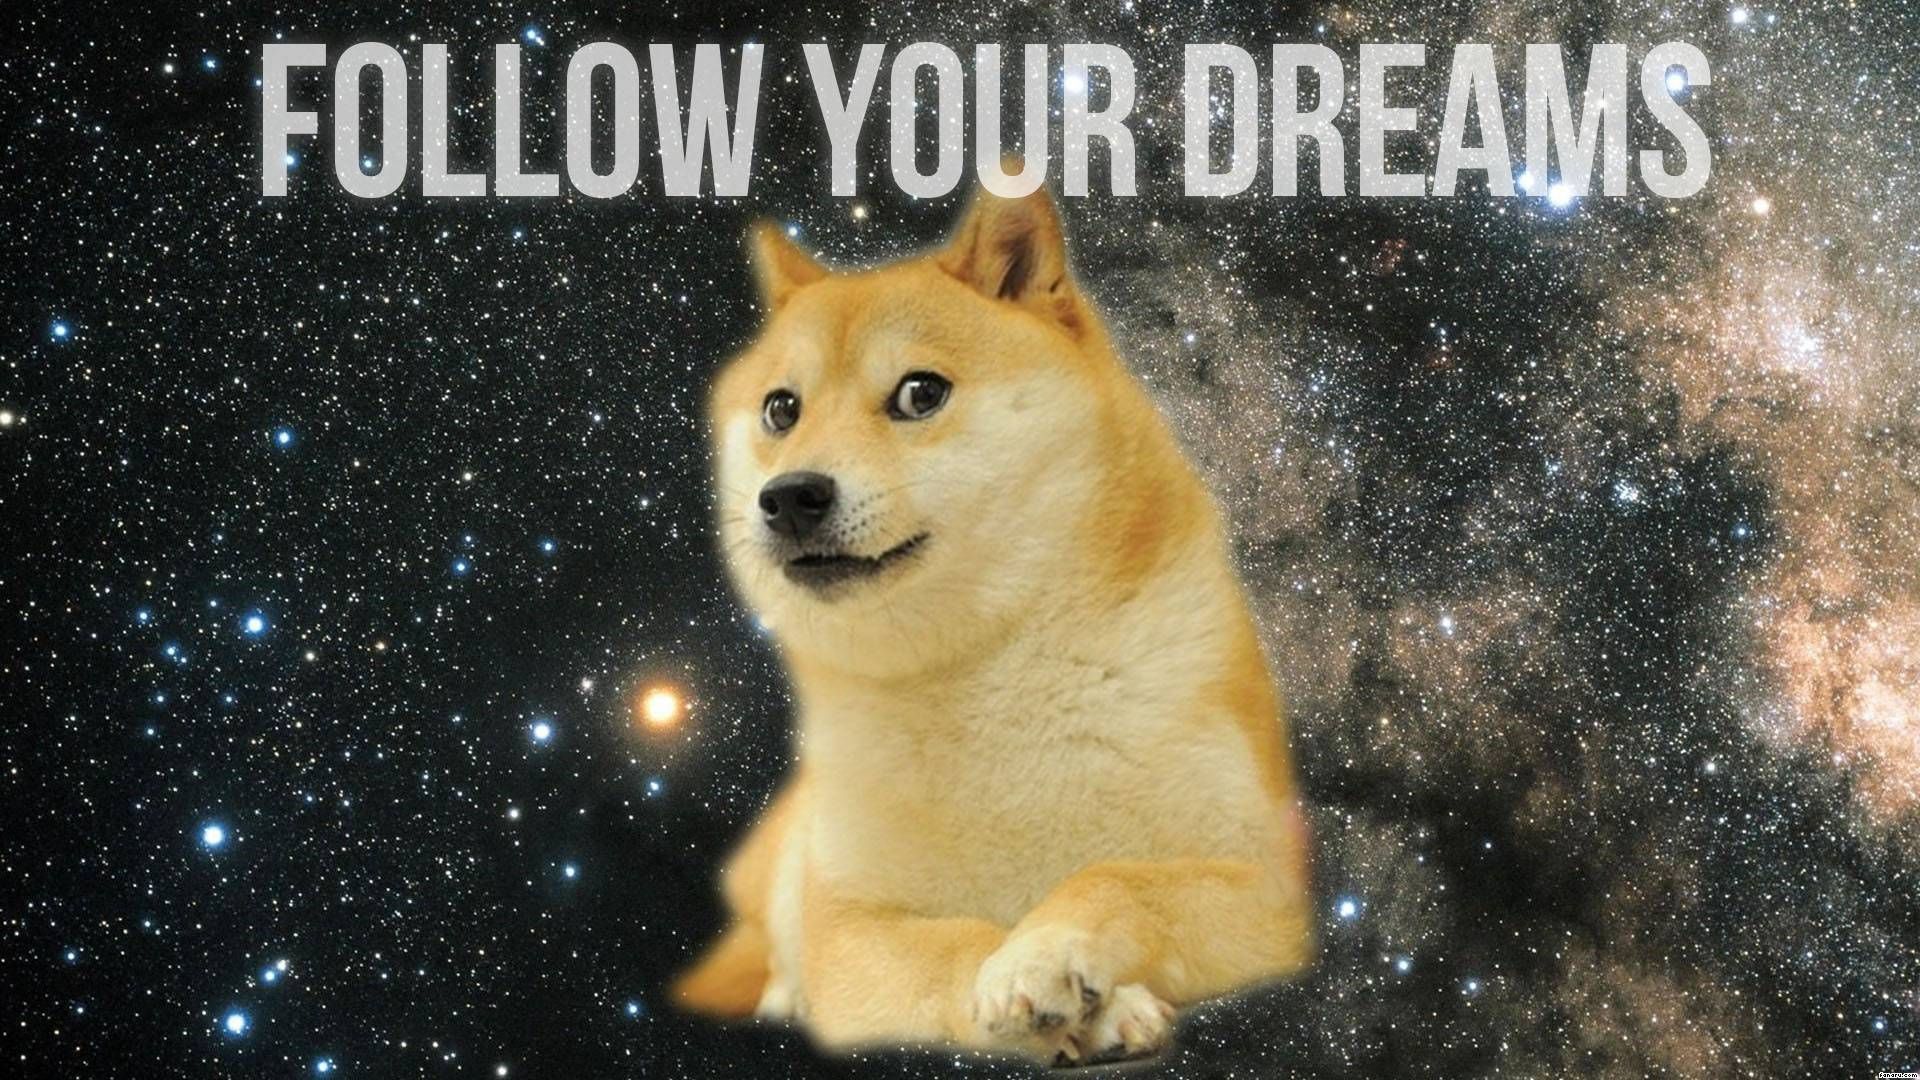 Wow Such Wallpaper Wallpaper. Animal lover, Follow your dreams quotes, Dog memes